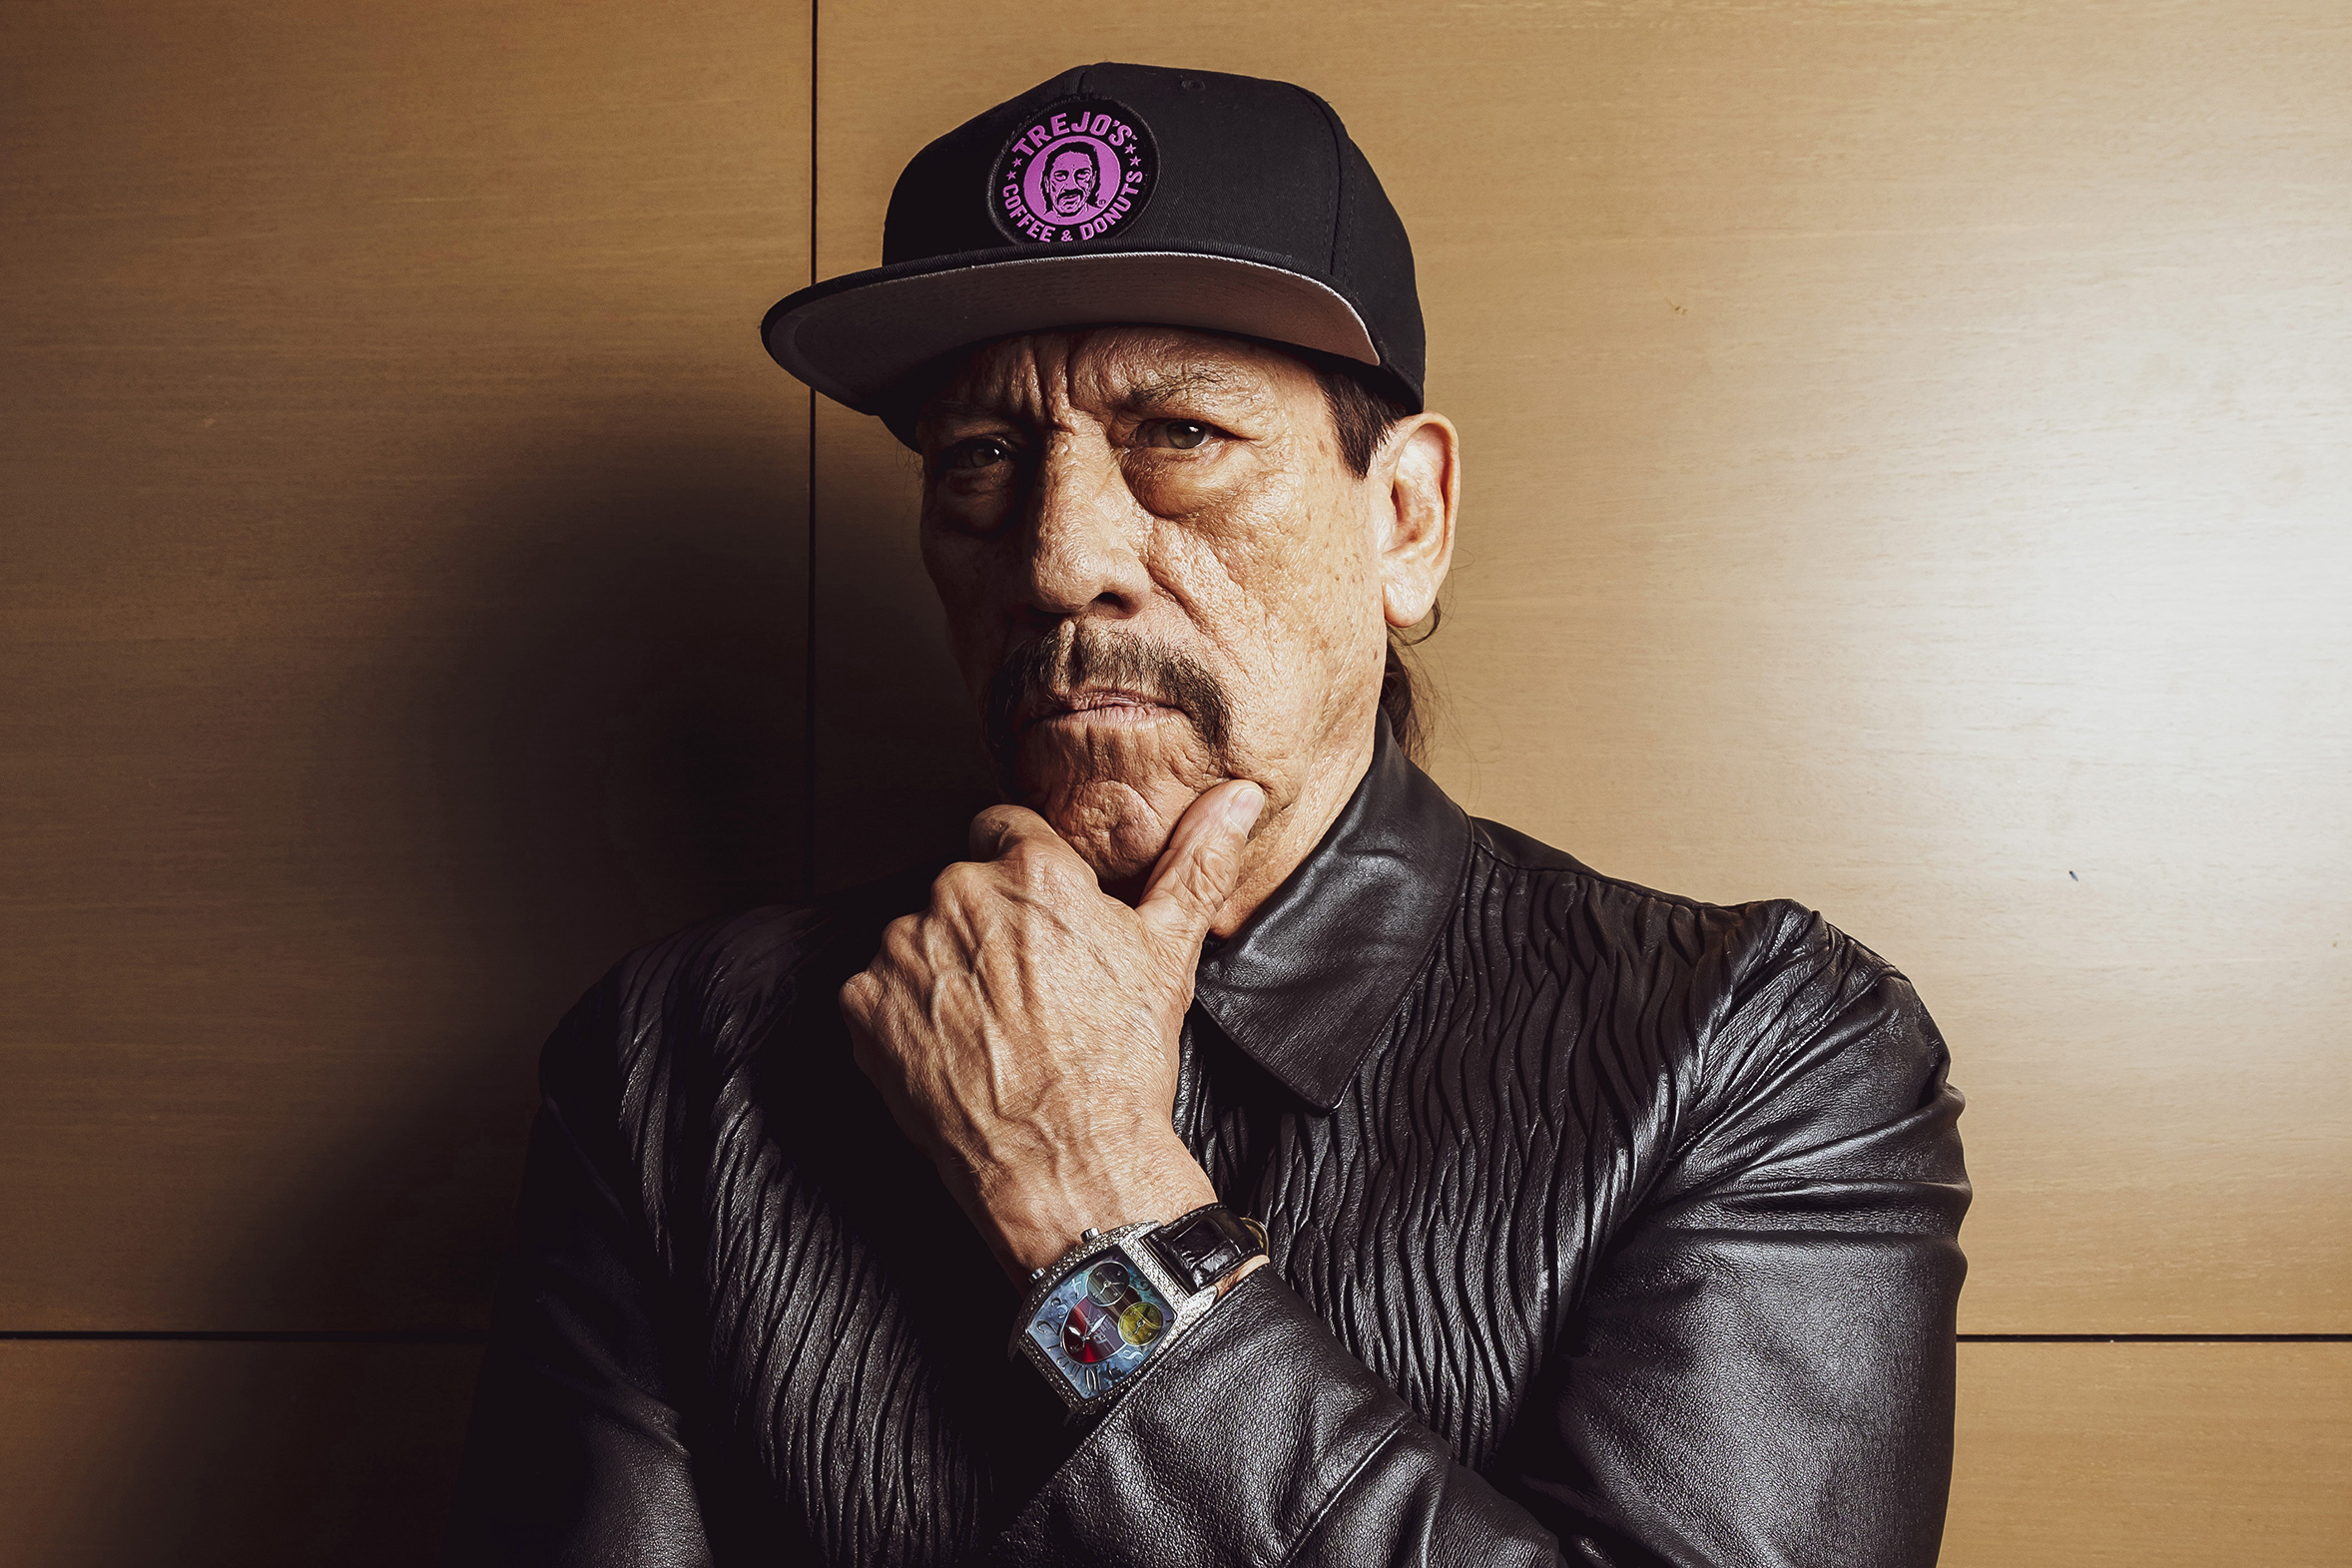 Danny Trejo Filing For Bankruptcy to Escape Personal Debt